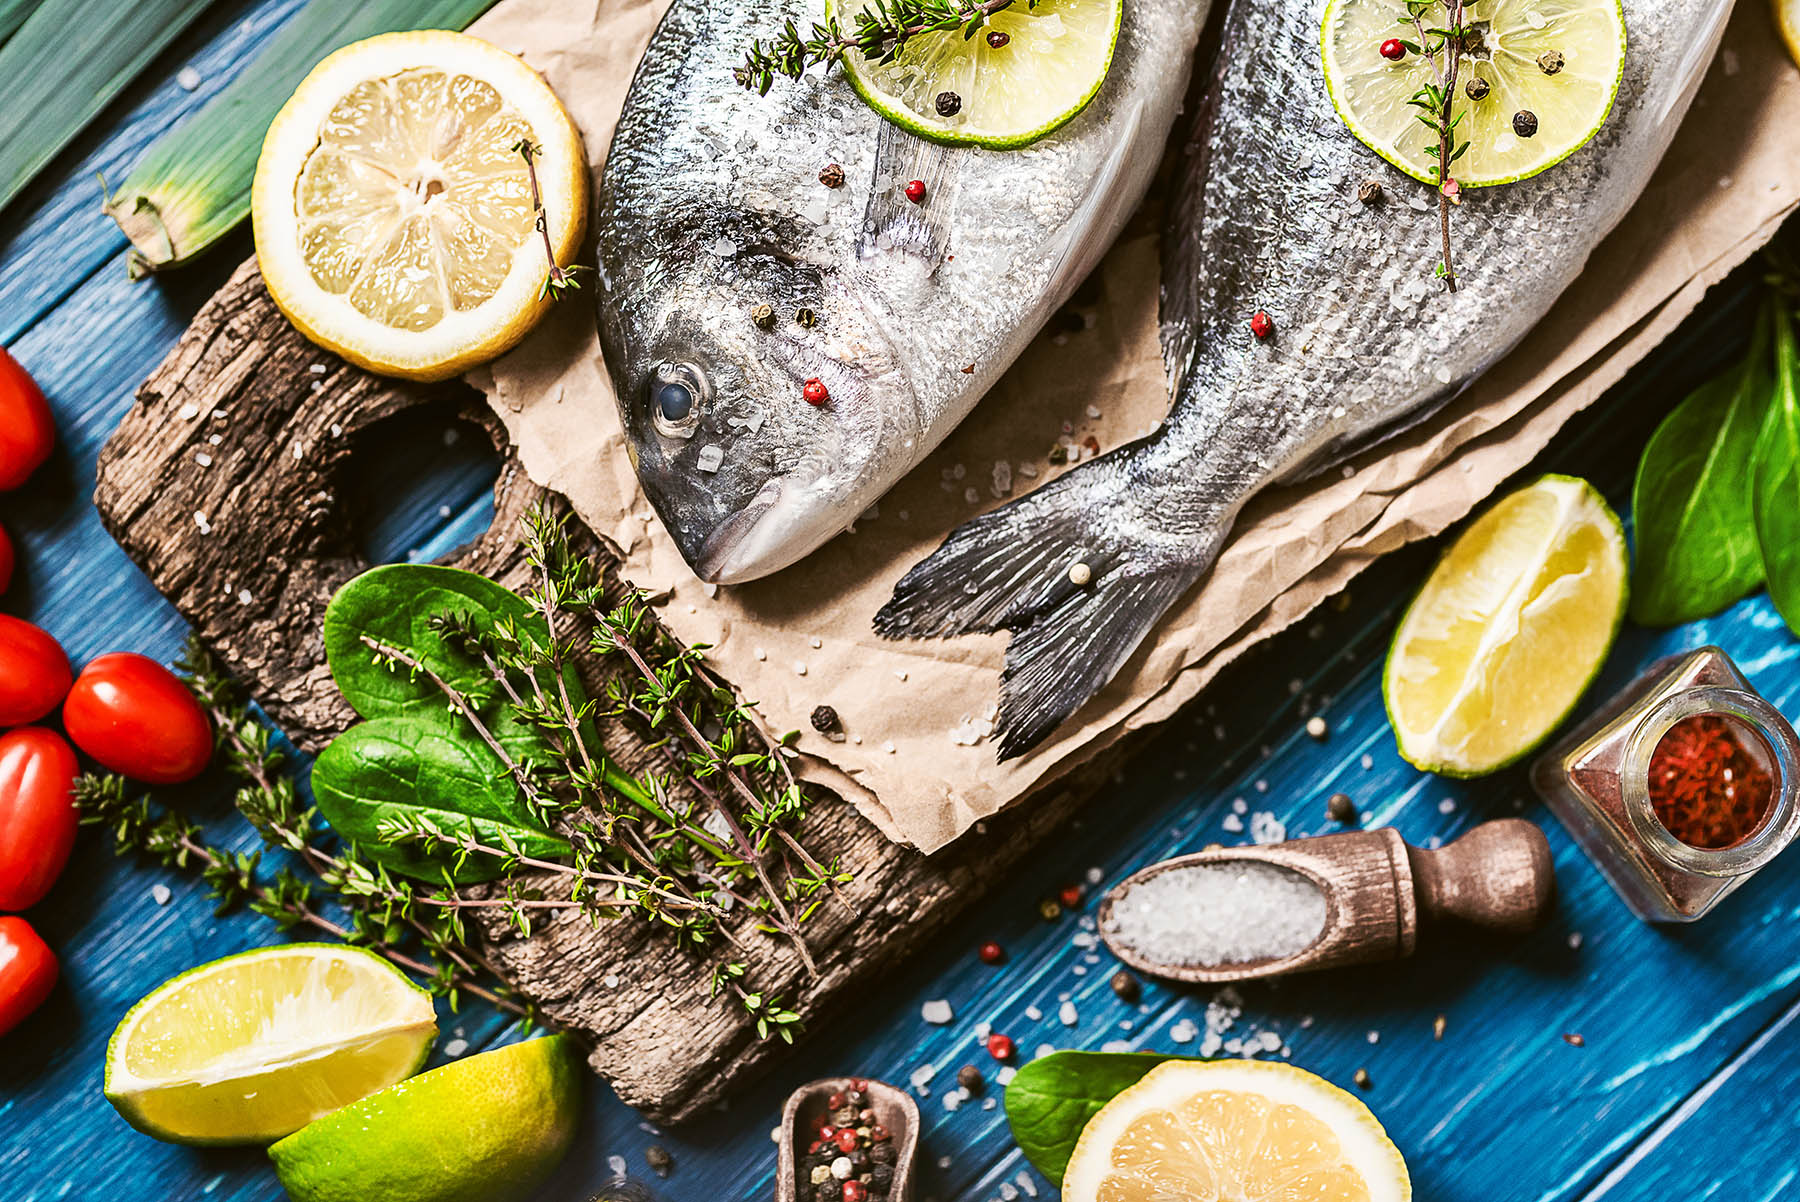 Preparing and Cooking Your Catch: Tasty Fish Recipes